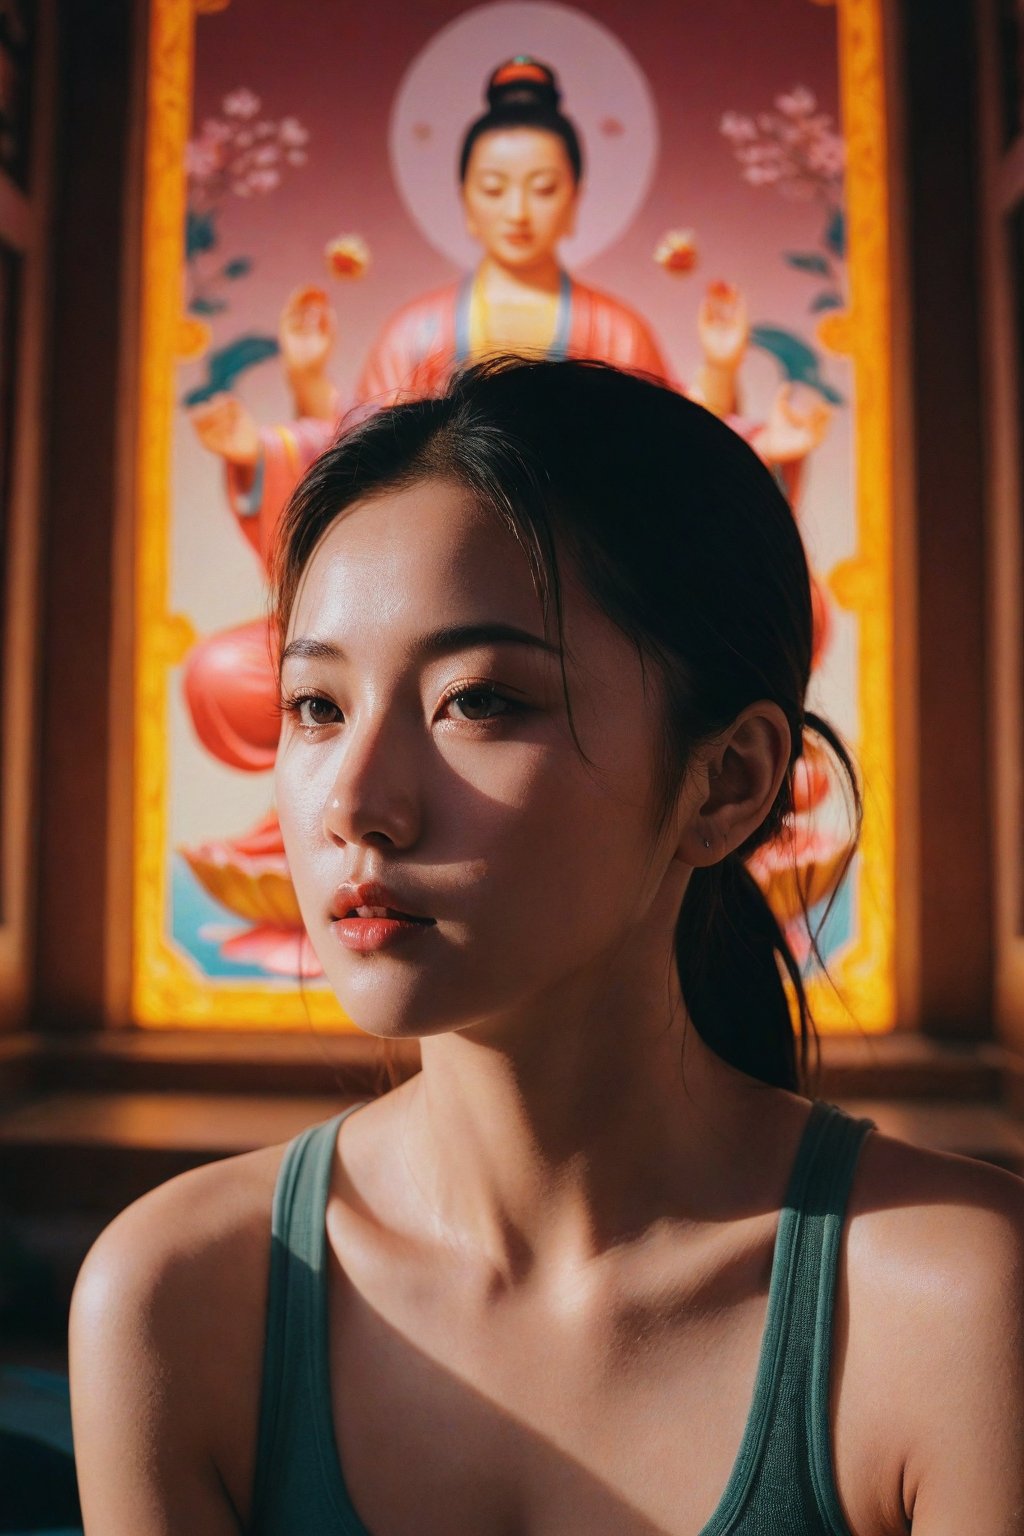 (ultra realistic,best quality),photorealistic,Extremely Realistic, in depth, cinematic light, chinese mix french, martial, smart, medictation, splash detailed, surreal dramatic lighting shadow (lofi, analog), kodak film by Brandon Woelfel Ryan McGinley, moment eyes, beautiful face, mid body, yoga, medication, 
intricate background, realism,realistic,raw,analog,portrait,photorealistic,